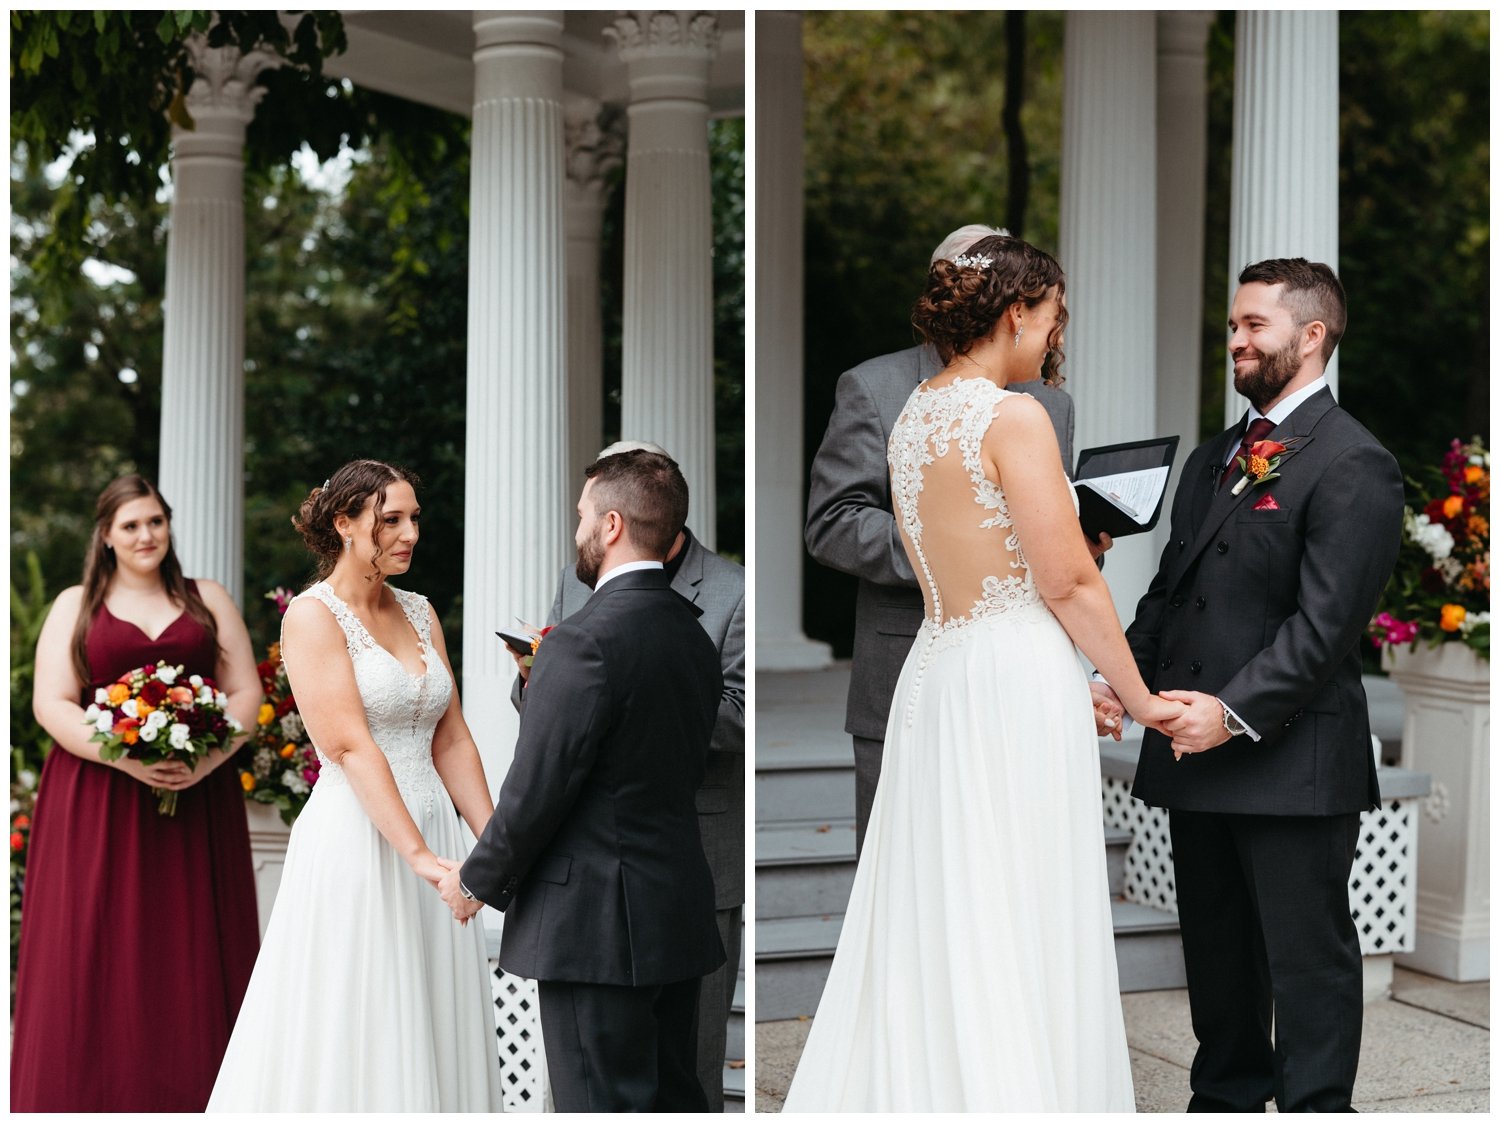 The couple exchanges vows at the intimate destination wedding